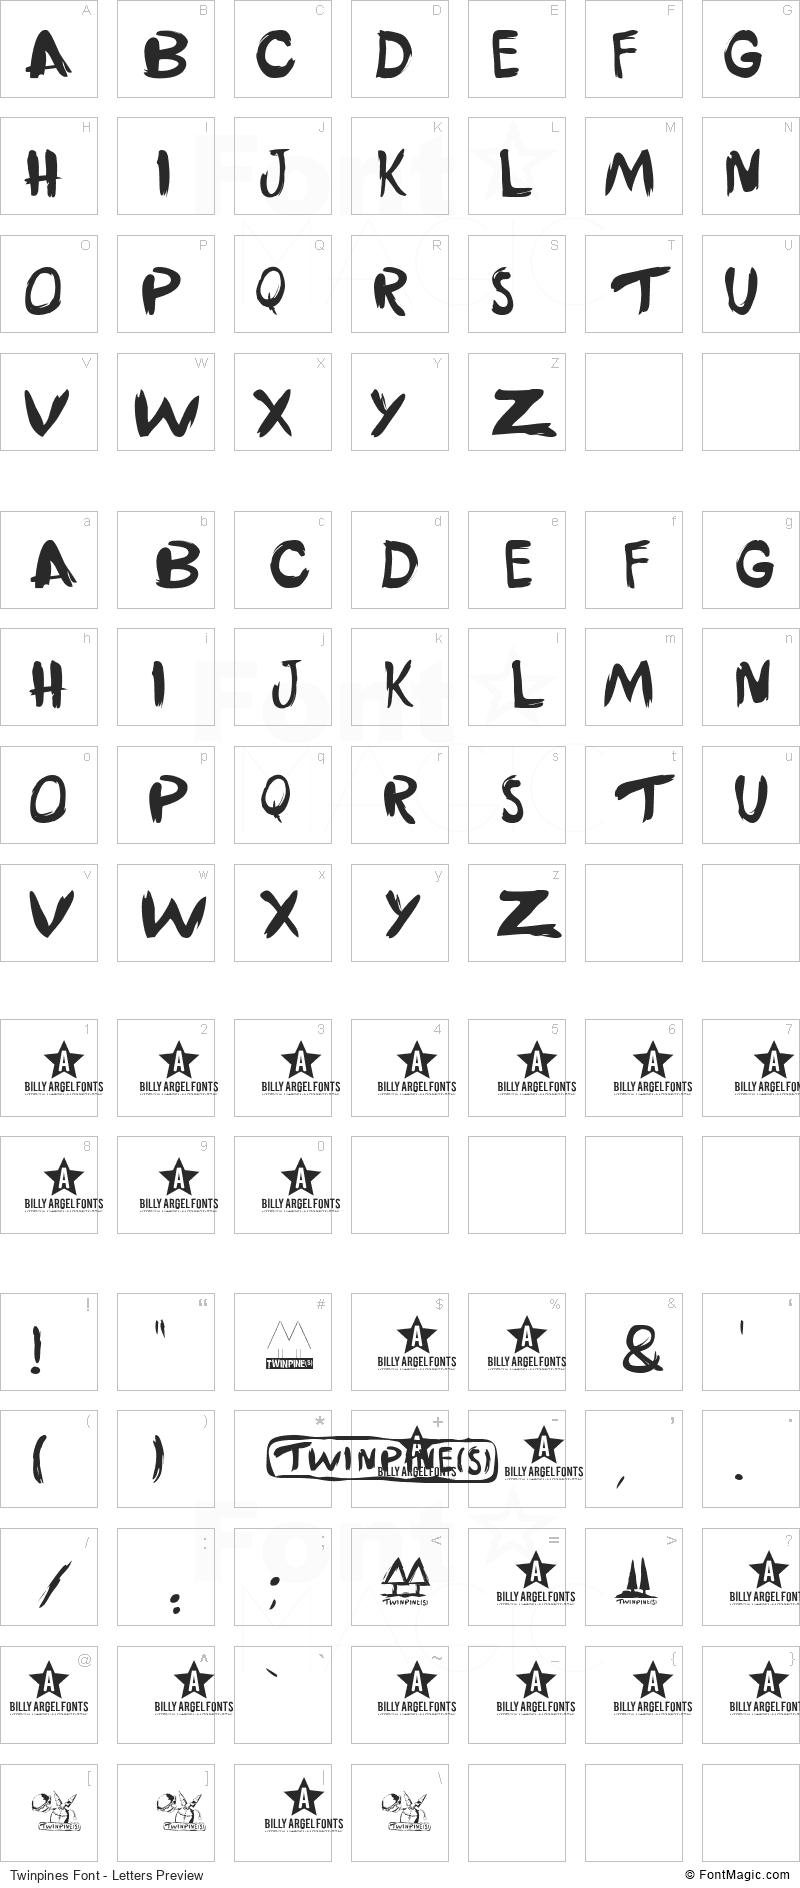 Twinpines Font - All Latters Preview Chart